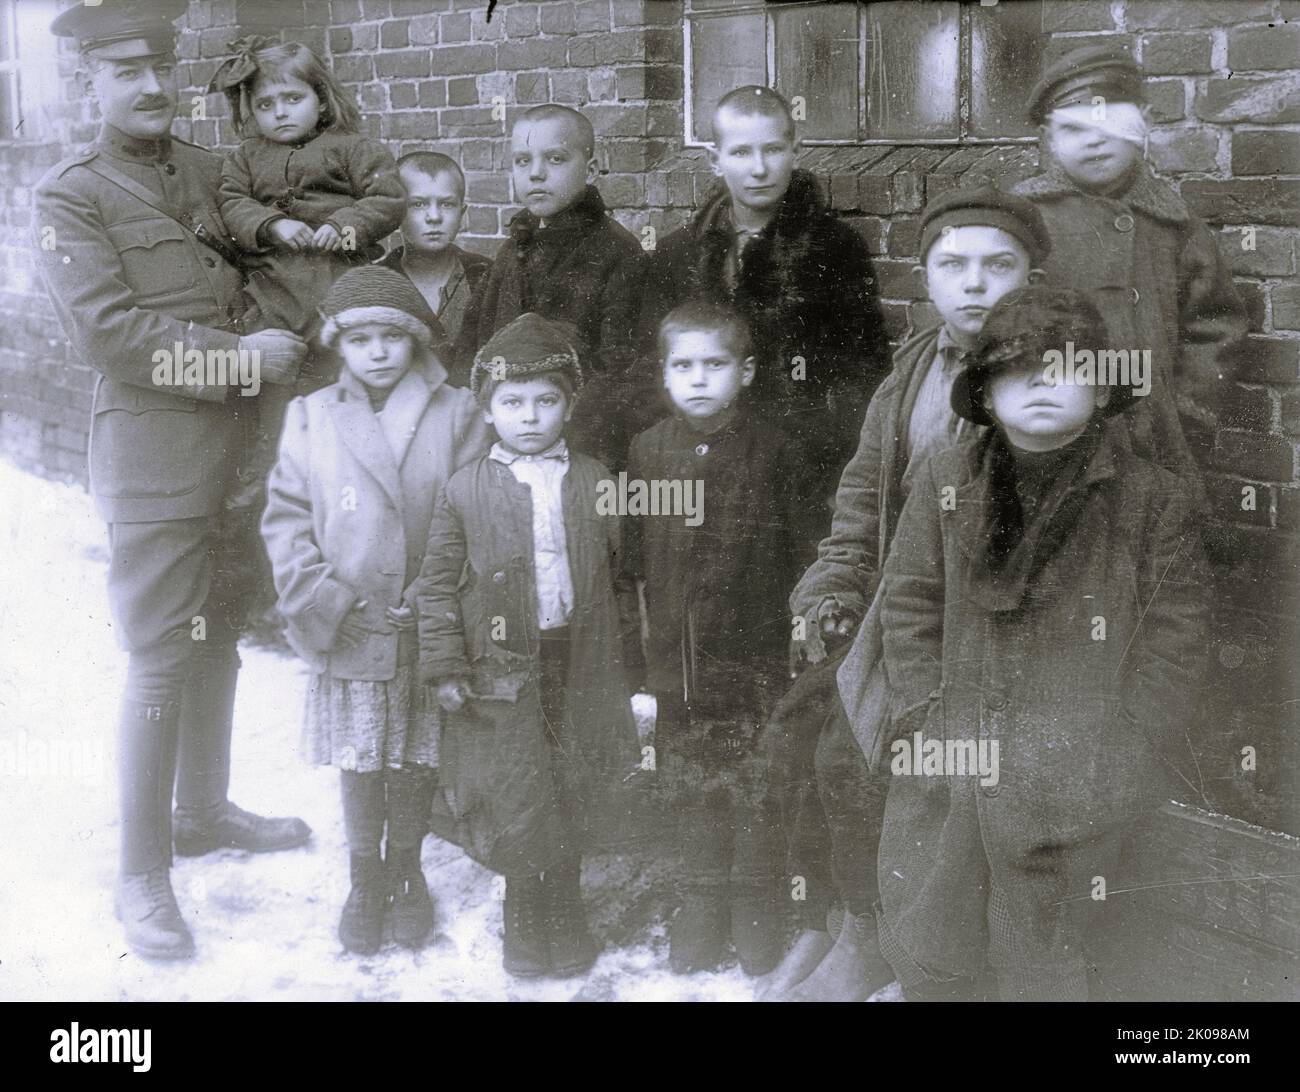 Polish orphans selected at random from a refugee camp sheltering 20,000 near Warsaw, 1920. Stock Photo